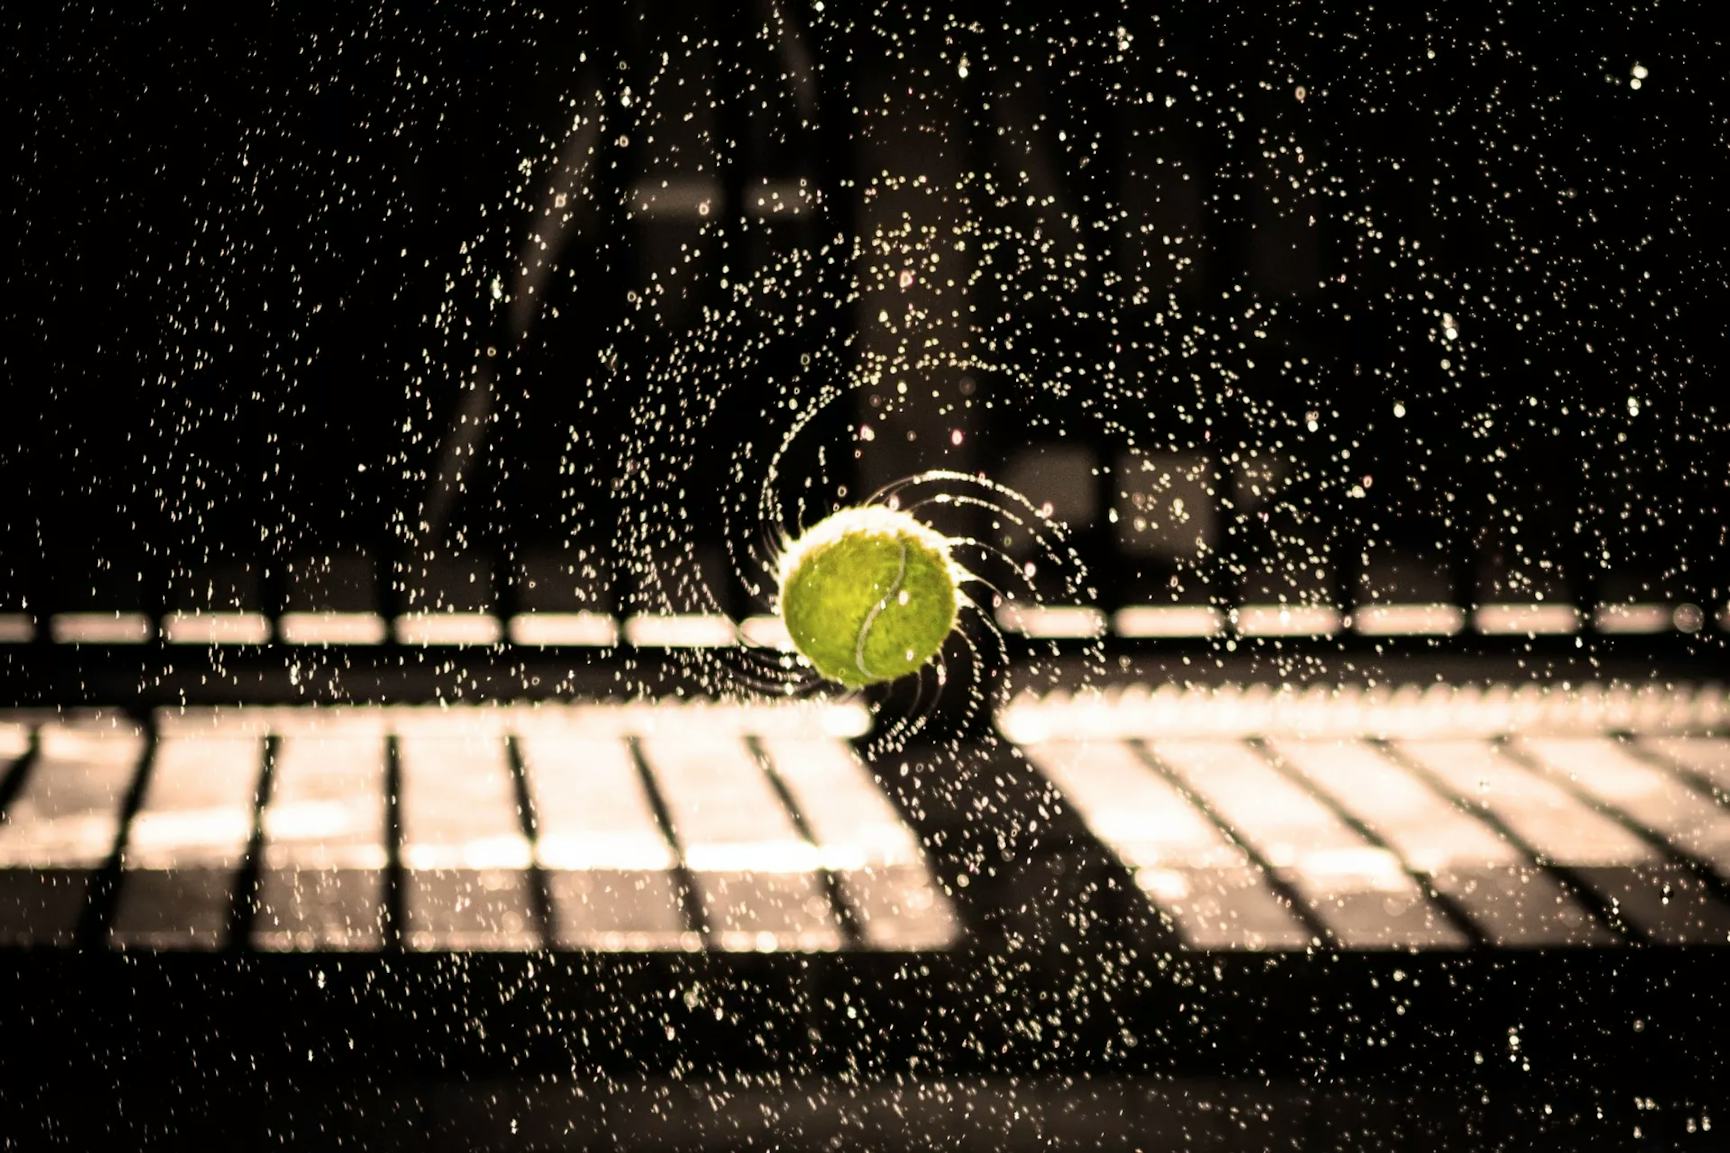 Wet tennis ball spinning in the air